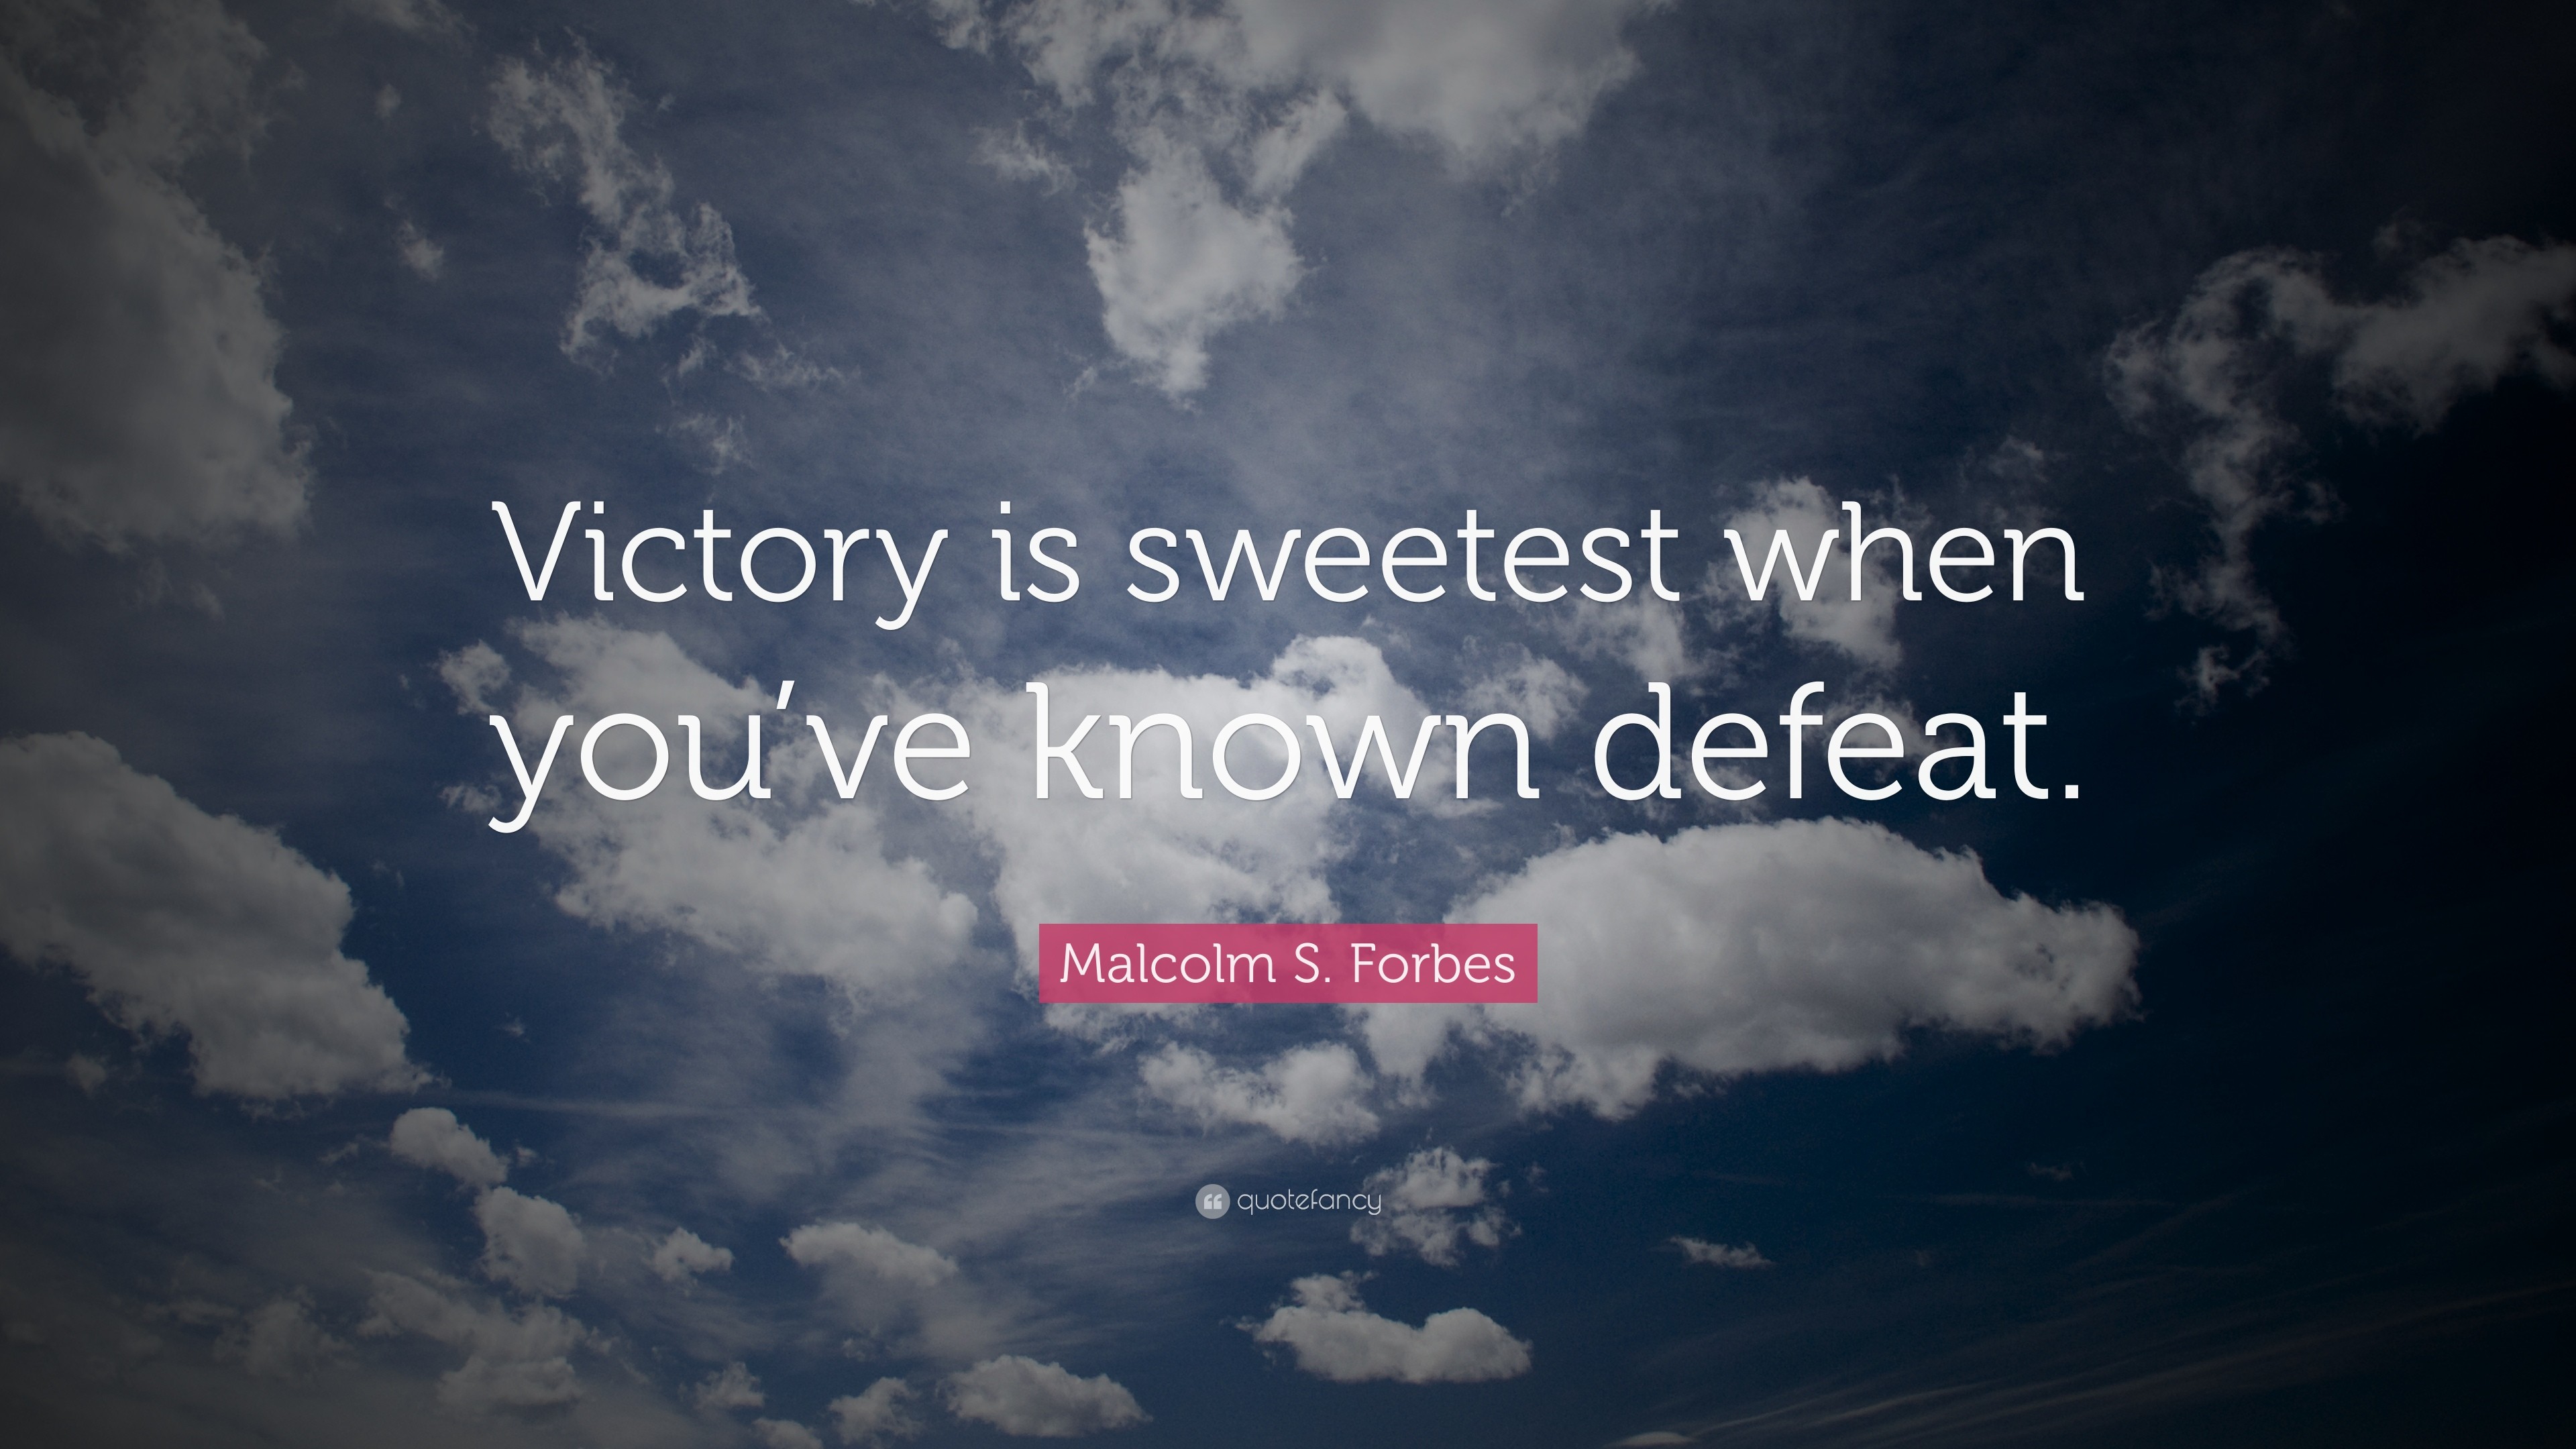 3840x2160 Positive Quotes: “Victory is sweetest when you've known defeat.” —